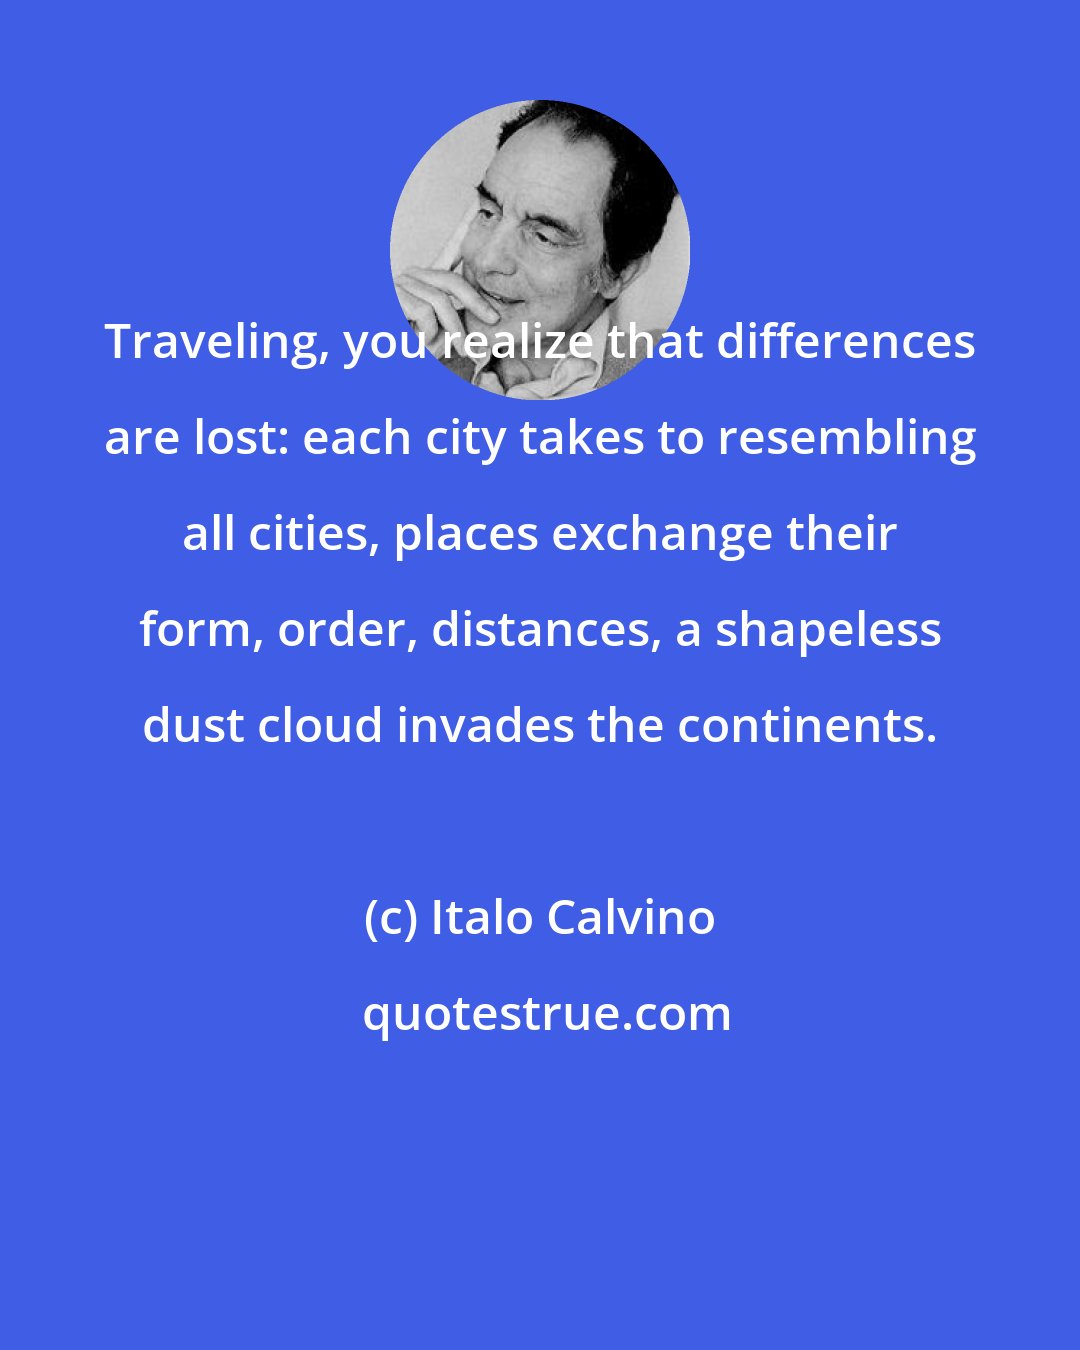 Italo Calvino: Traveling, you realize that differences are lost: each city takes to resembling all cities, places exchange their form, order, distances, a shapeless dust cloud invades the continents.